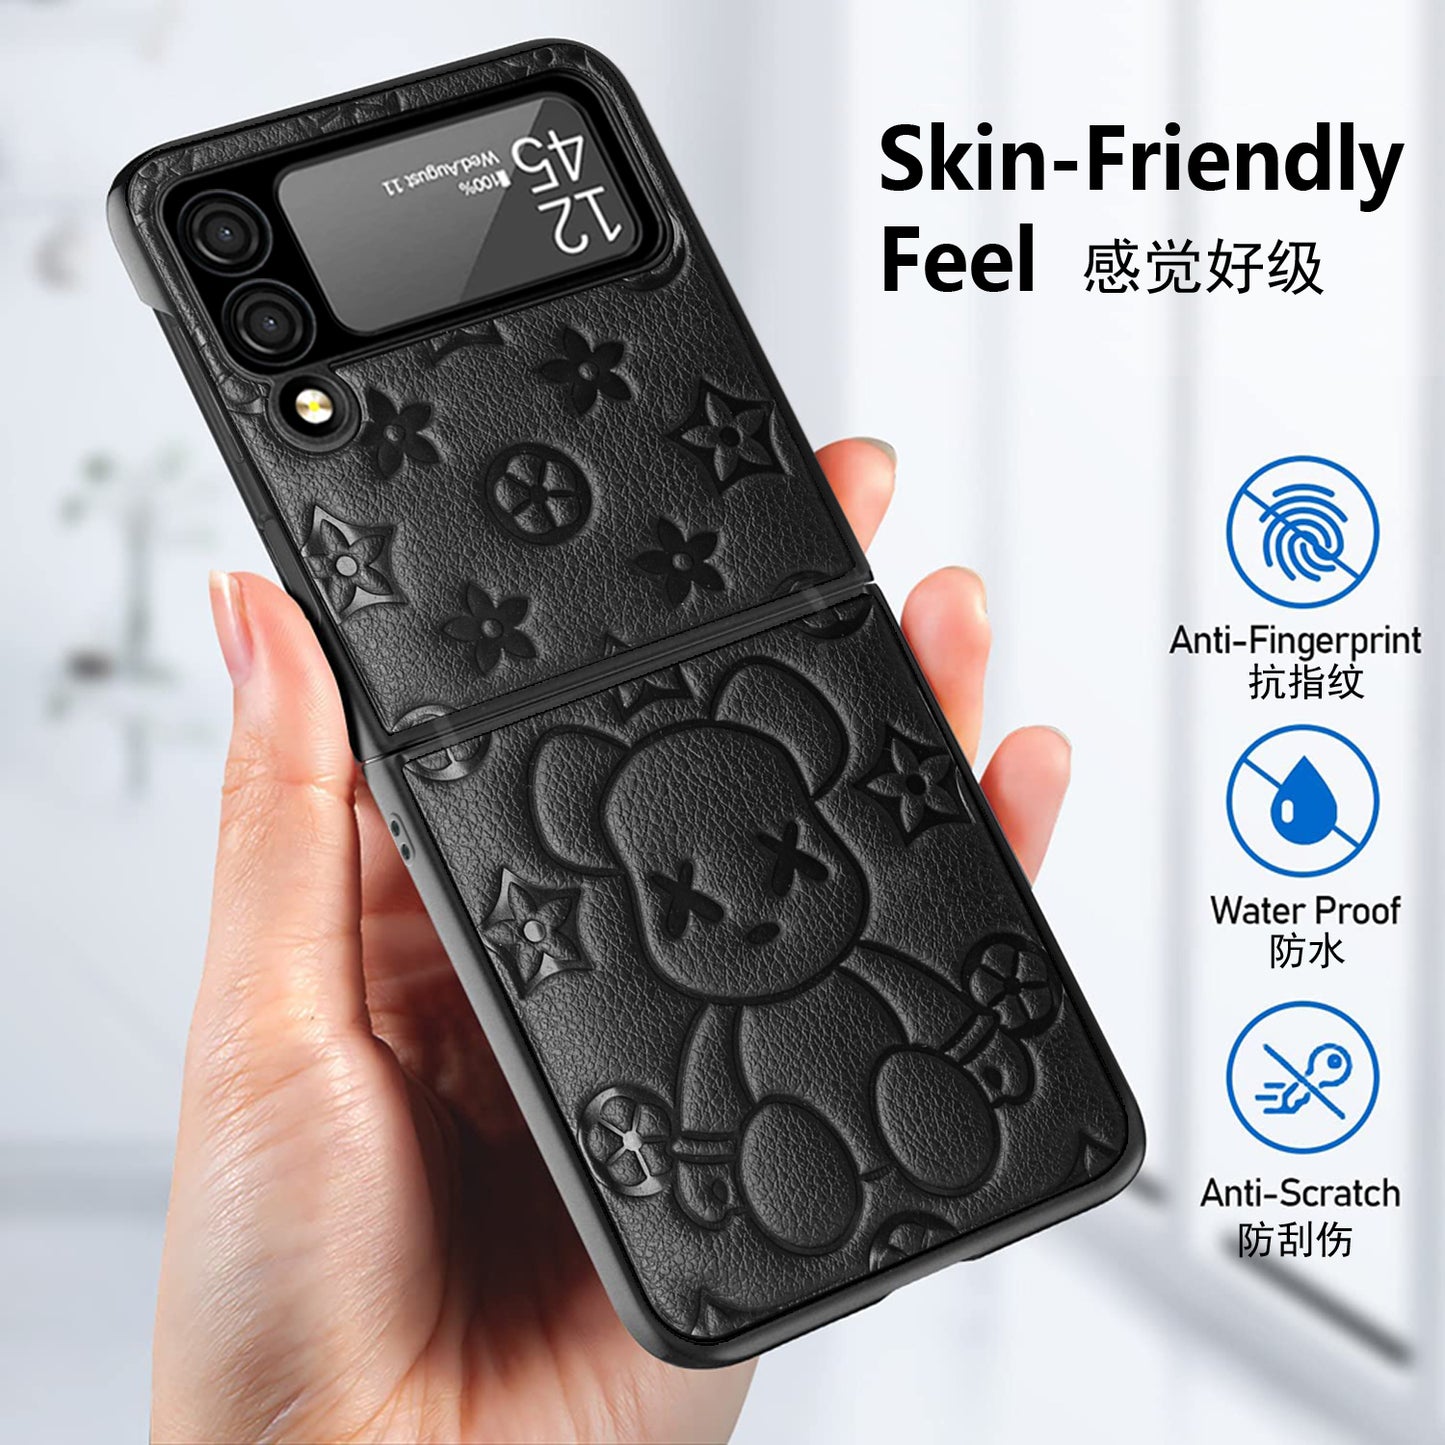 High Quality Leather Full Protective Case For SAM Flip 4 Waterproof Colorful Cover For Samsung Flip 4 Shockproof Case